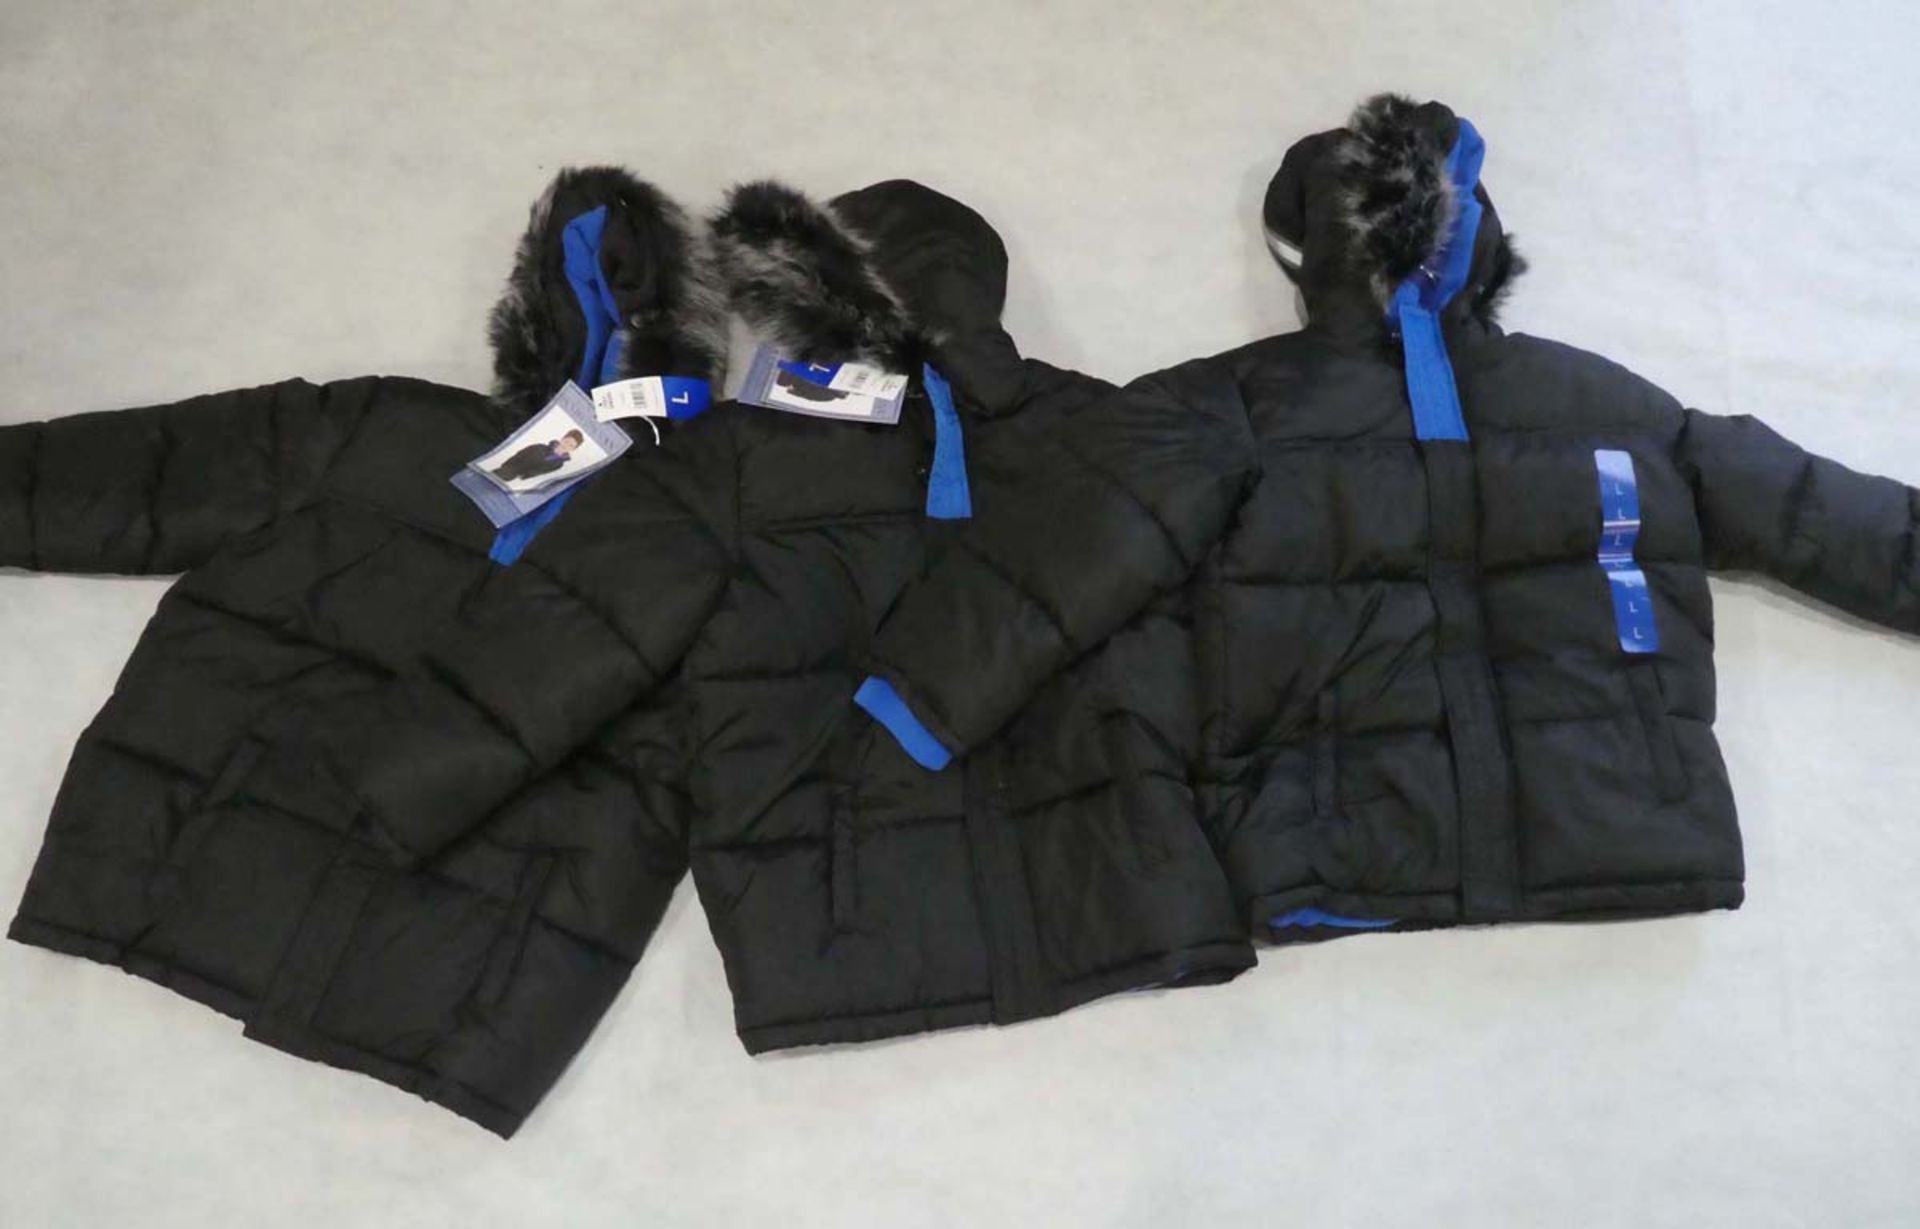 3 Children's Andy & Evan water repellent hooded parka jackets in black all size large